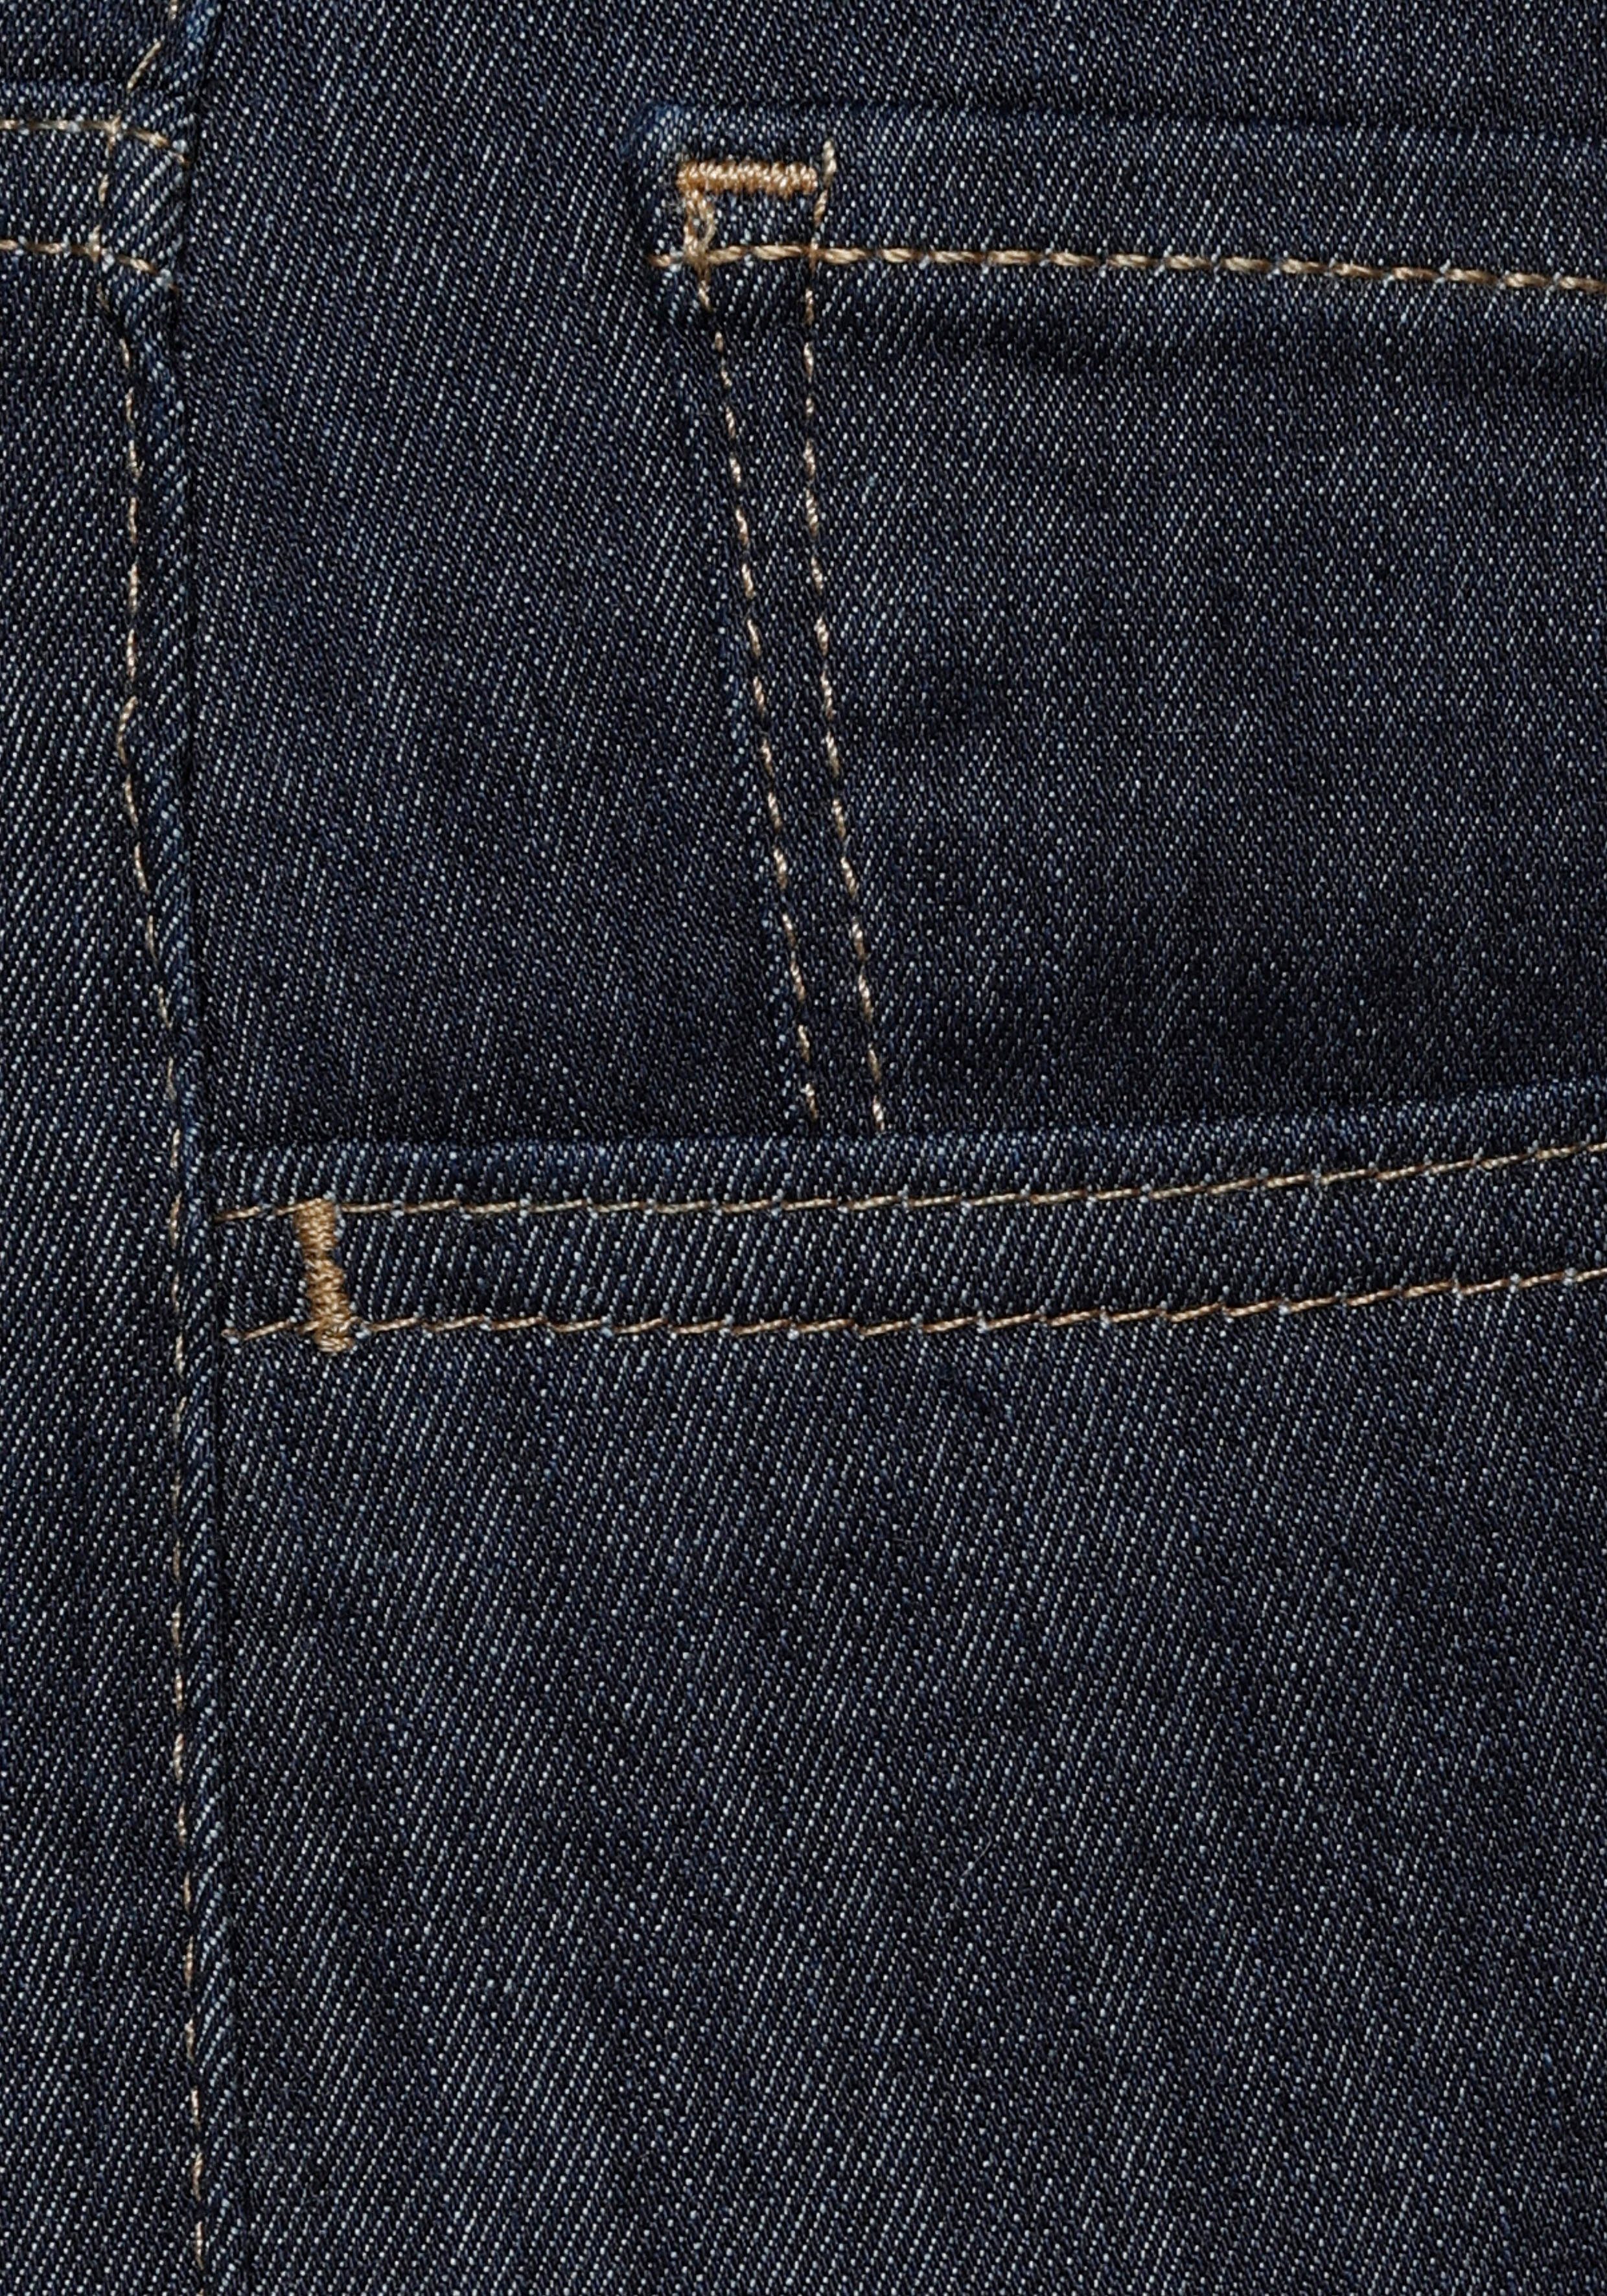 Leibhöhe mit Levi's® rinsed Skinny-fit-Jeans hoher 720 High-Rise Plus